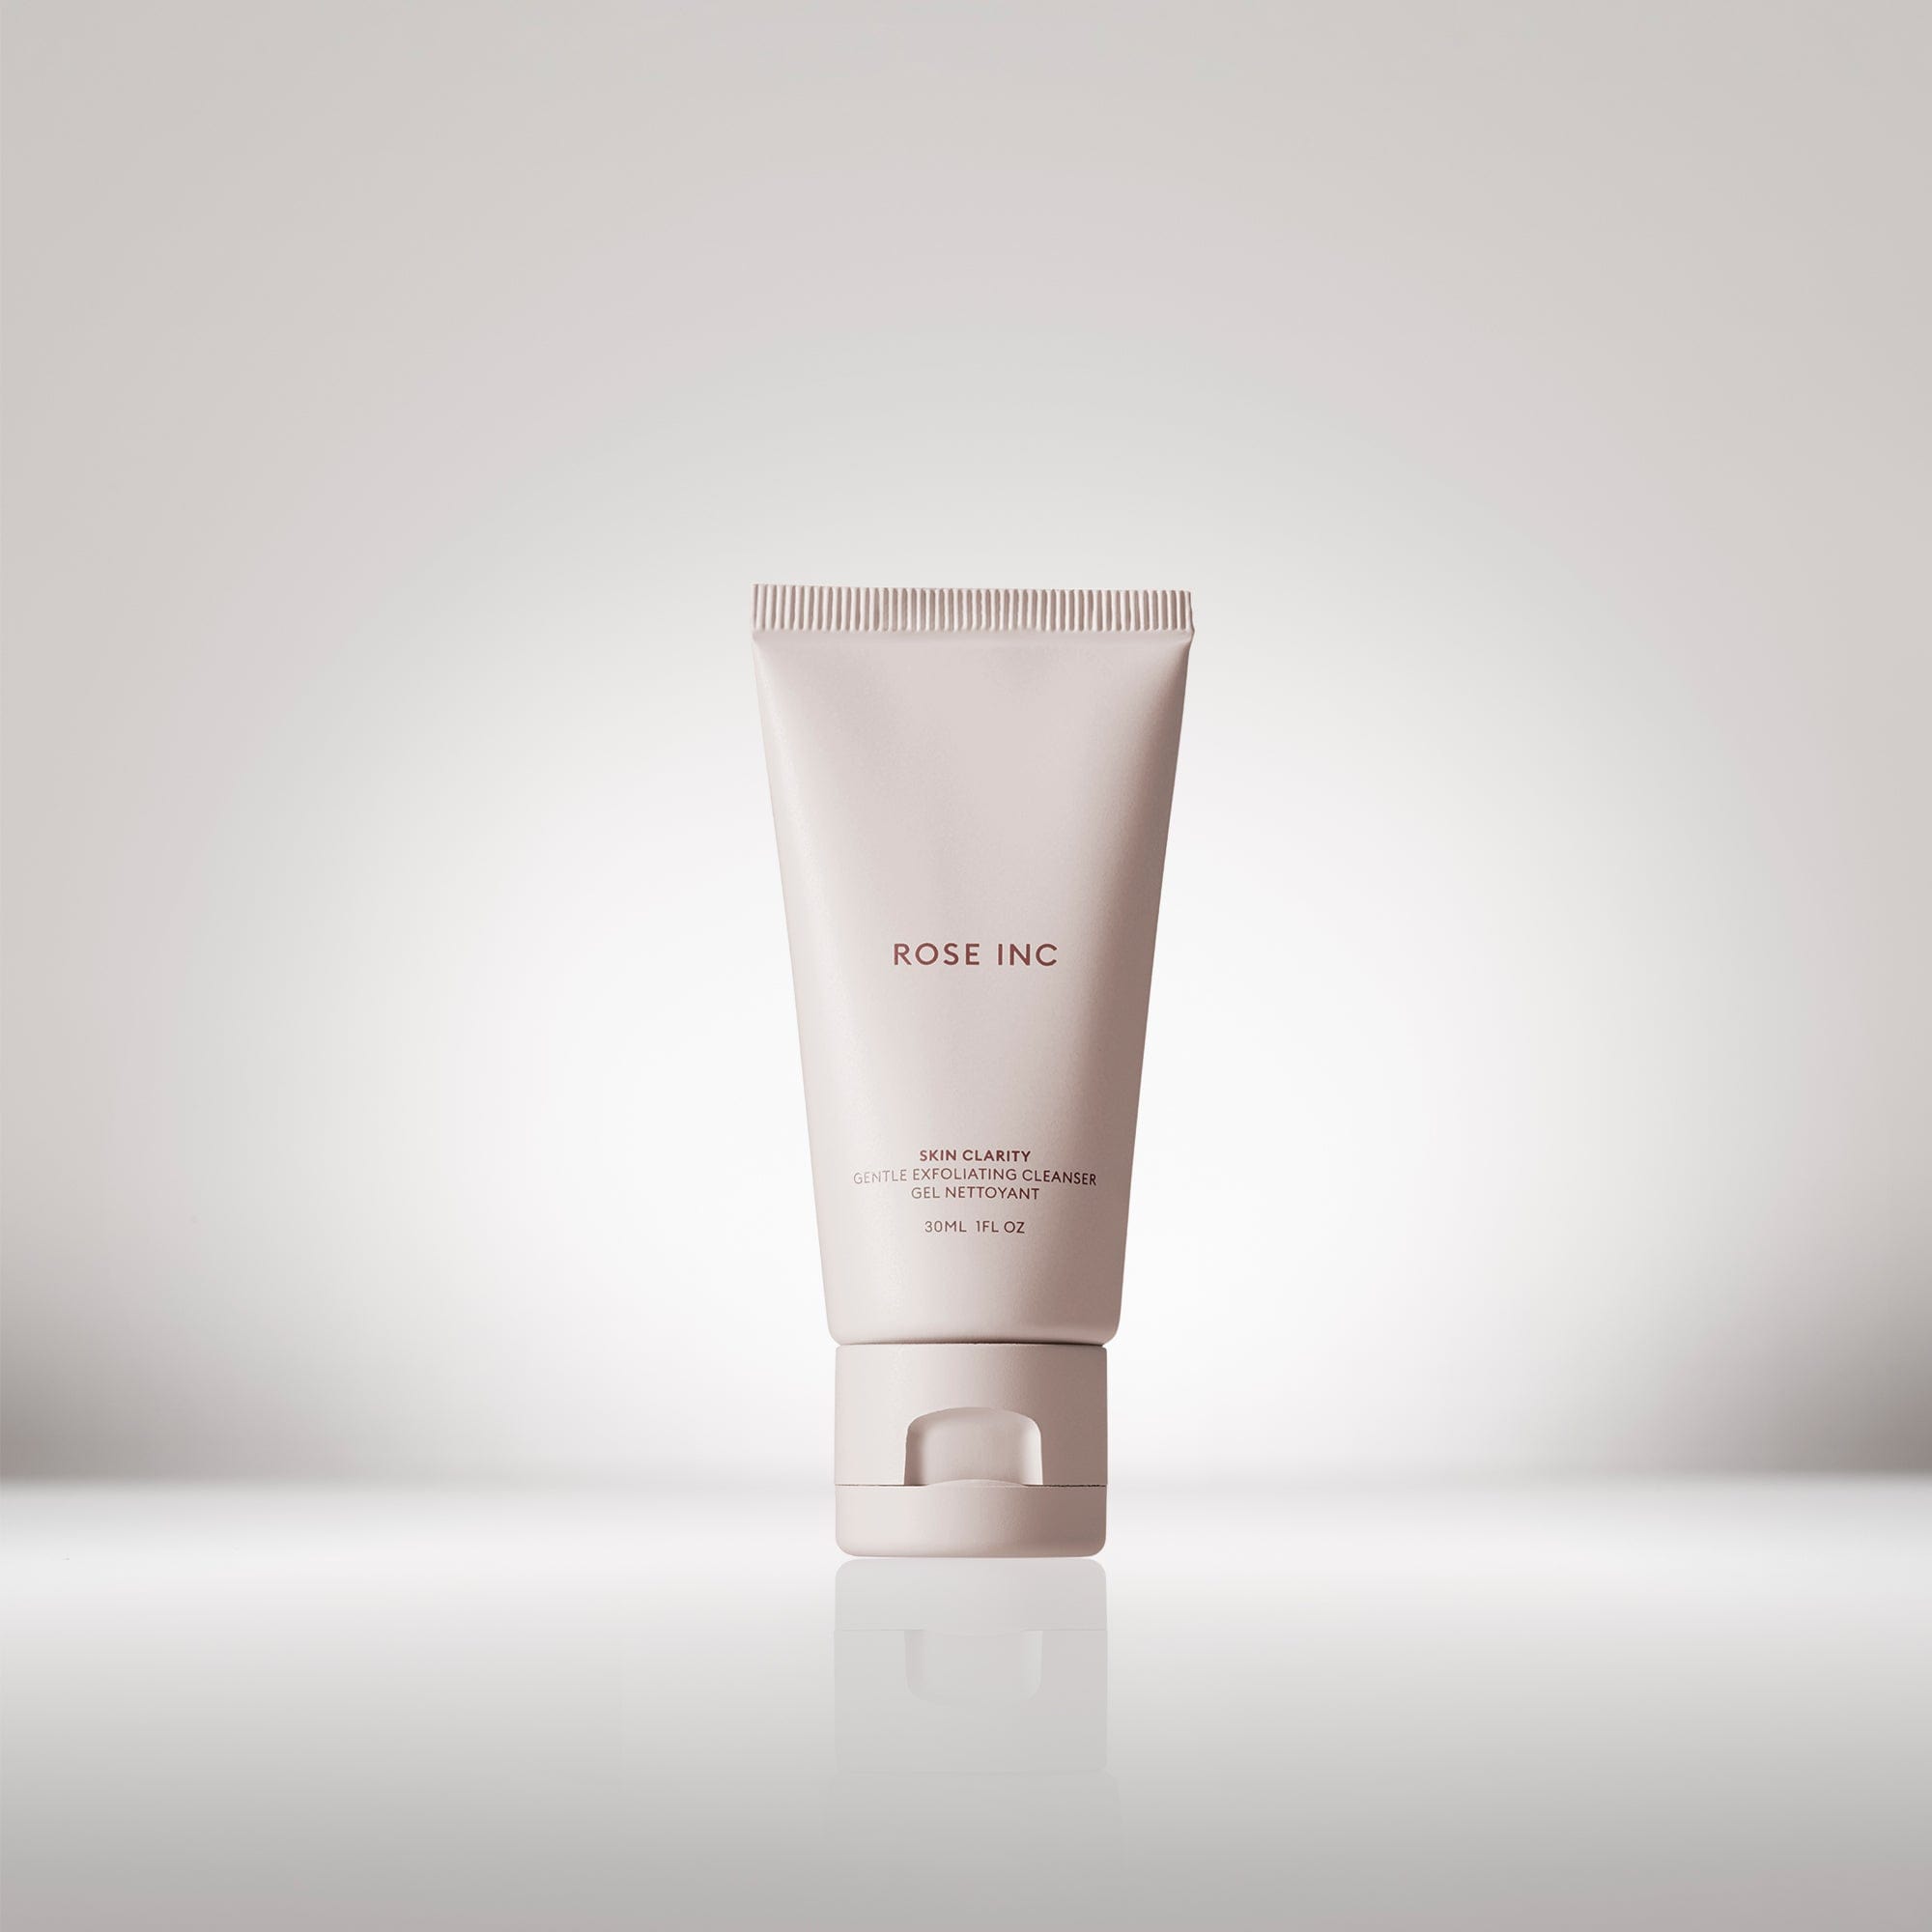 Rose Inc Travel Size Skin Clarity Gentle Exfoliating Cleanser